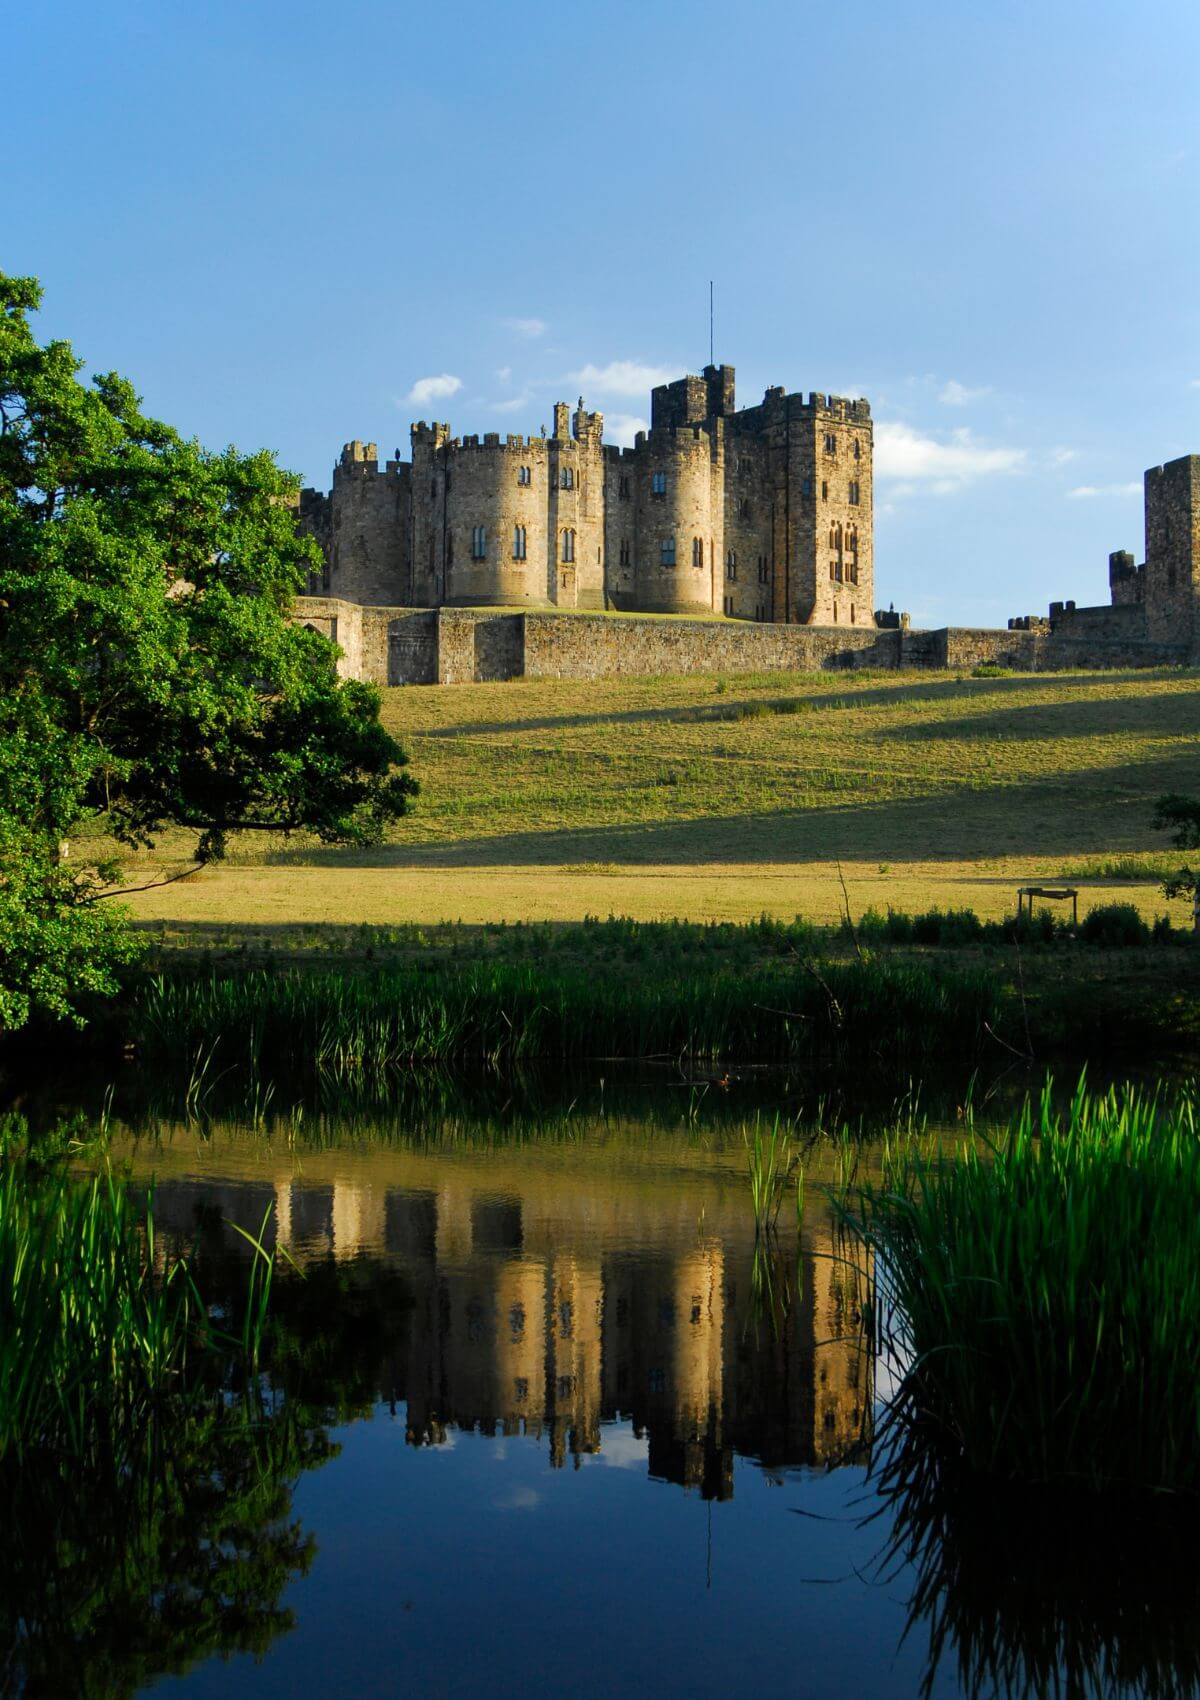 Alnwick Castle is one of England's biggest castles